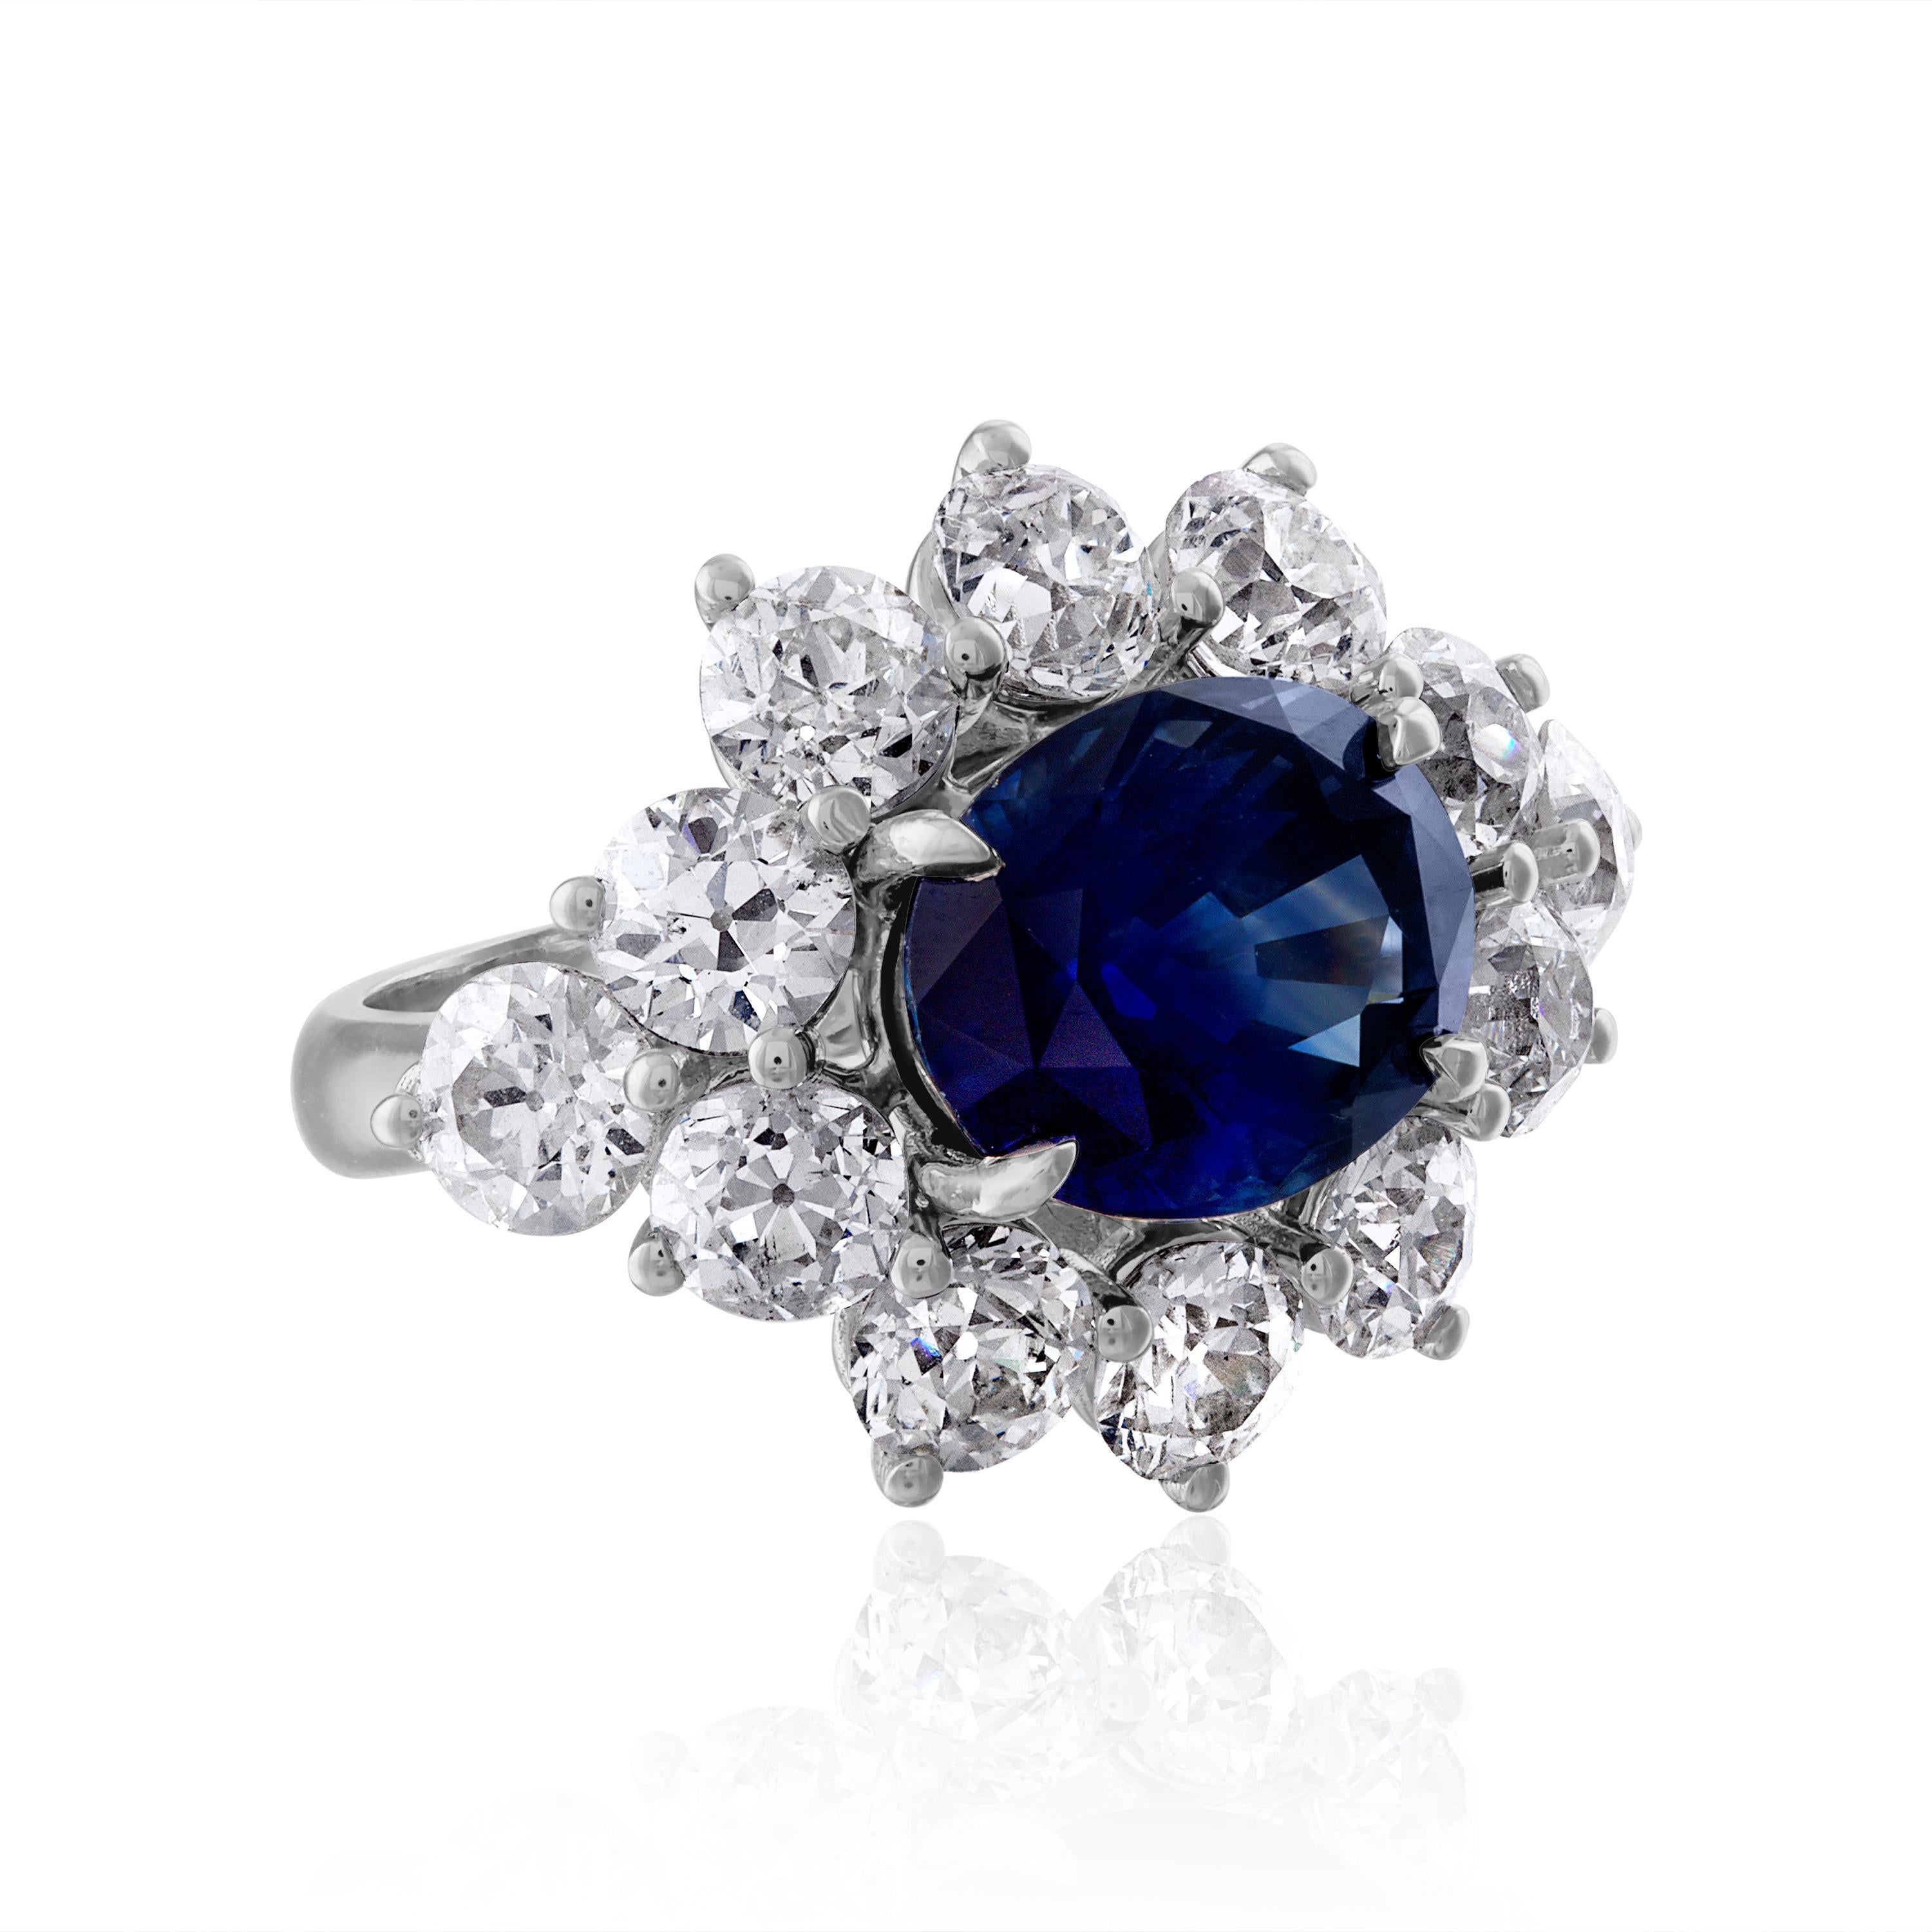 This One-of-a-kind Mindi Mond oval cut sapphire ring is an elegant statement that will always be in high style. 
1 oval Natural Ceylon Sapphire @13.06 x 10.44 x 7.83 mm = 8.29 CTW
Origin- Sri Lanka GIA report #5222534024
Set in a custom 18k white